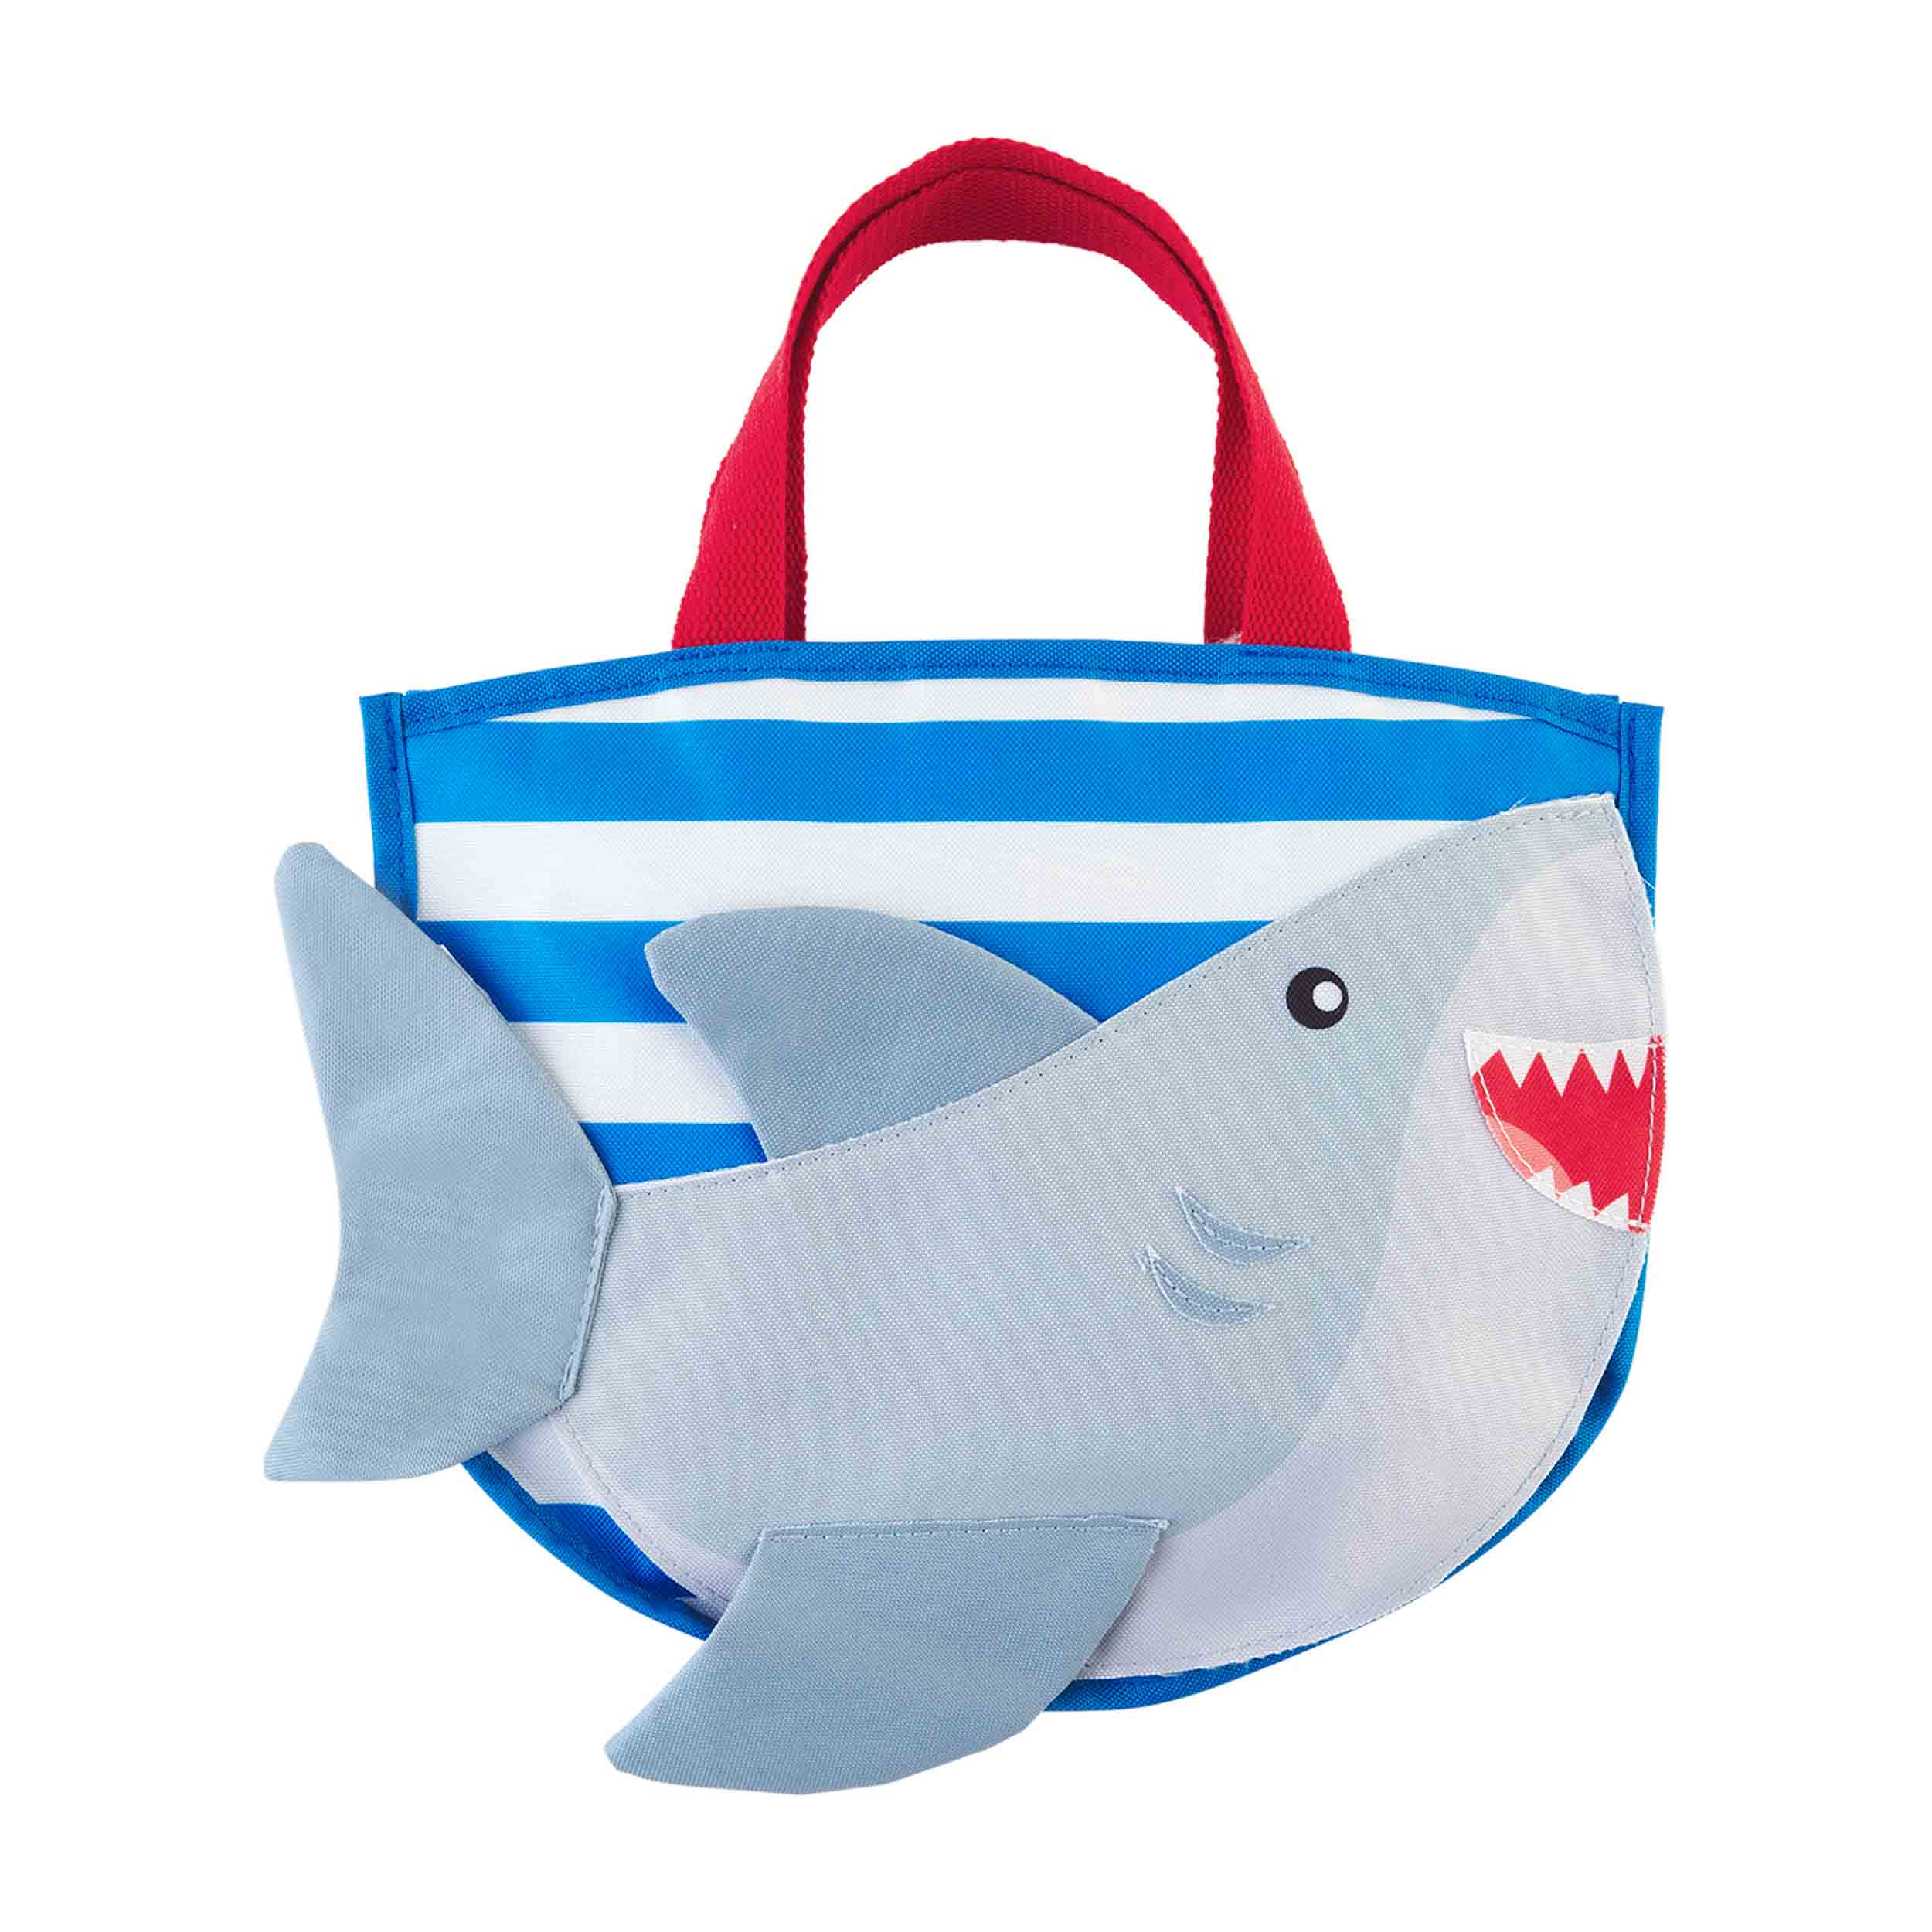 Mudpie Beach Tote with Toys